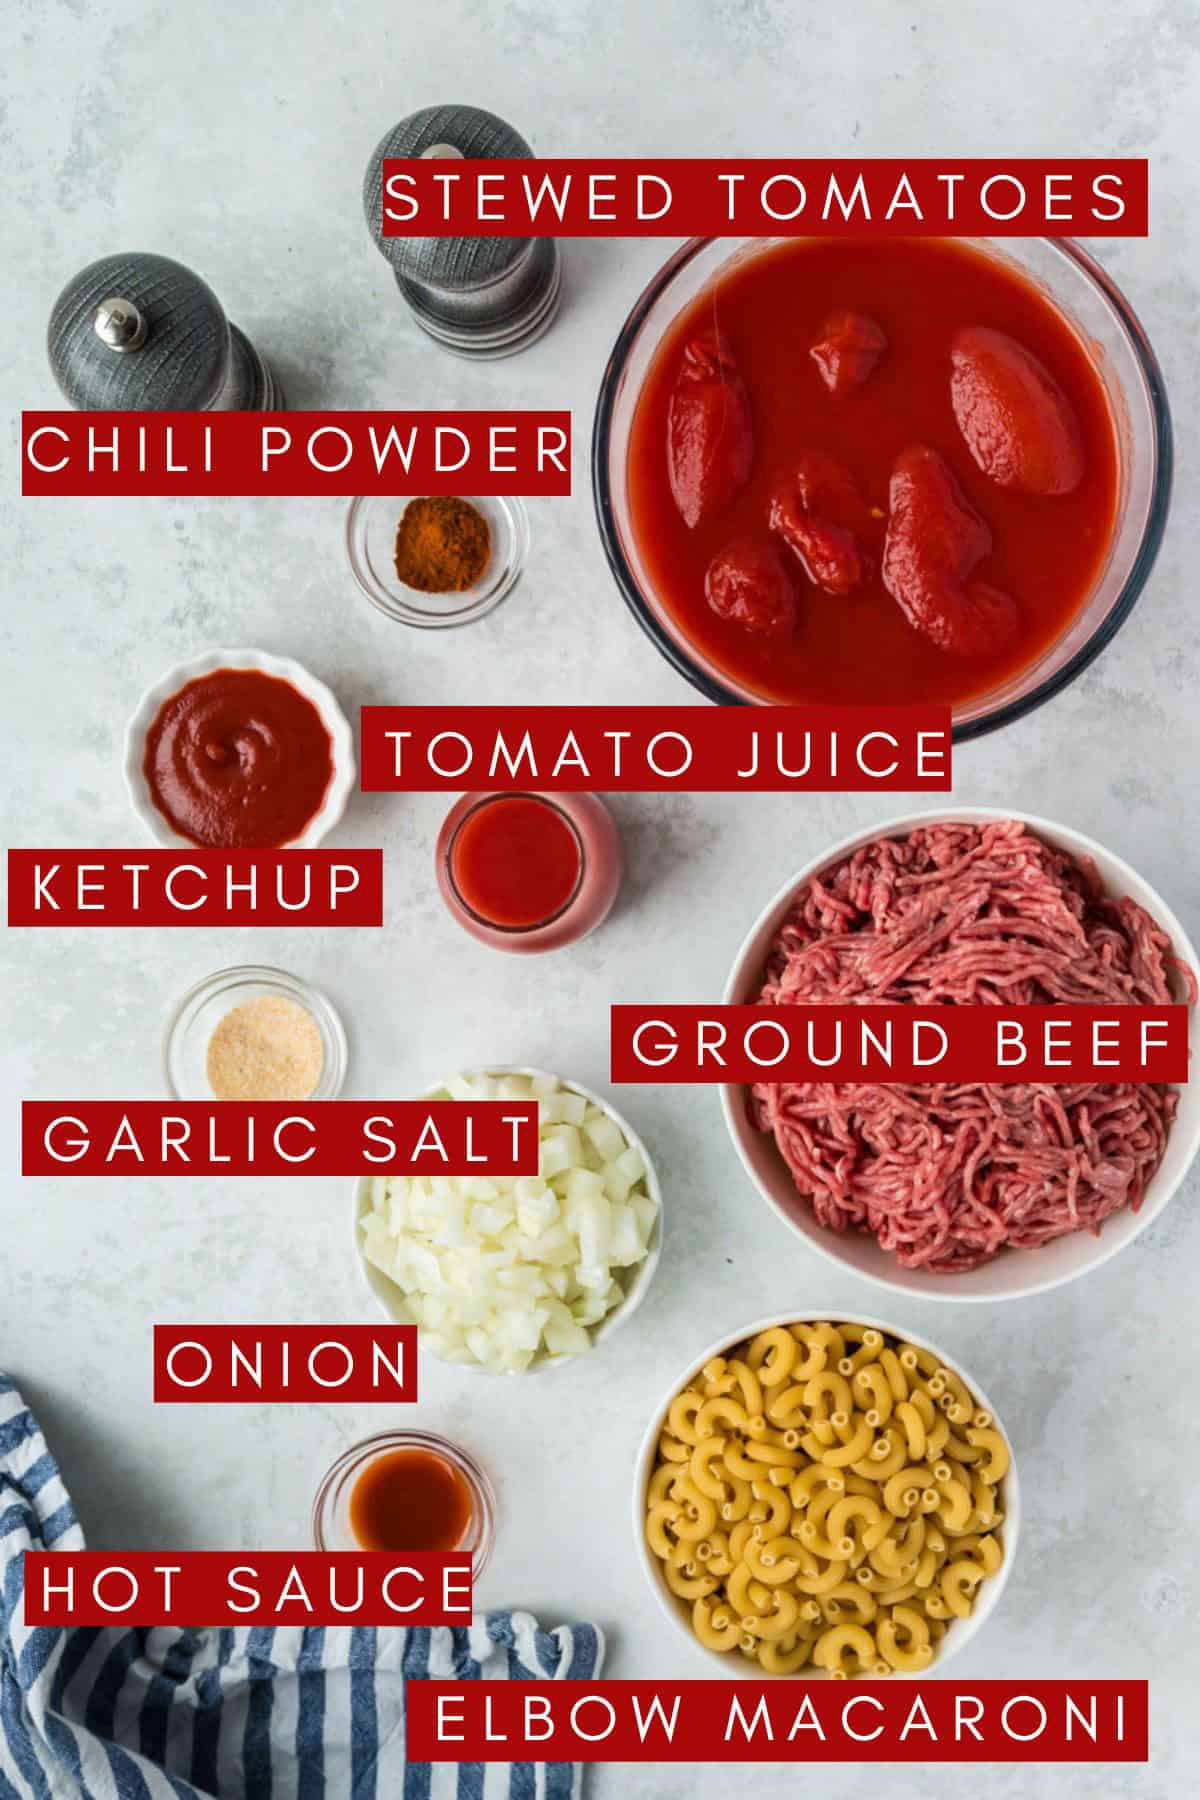 Ground beef and other ingredients to make old-fashioned goulash.